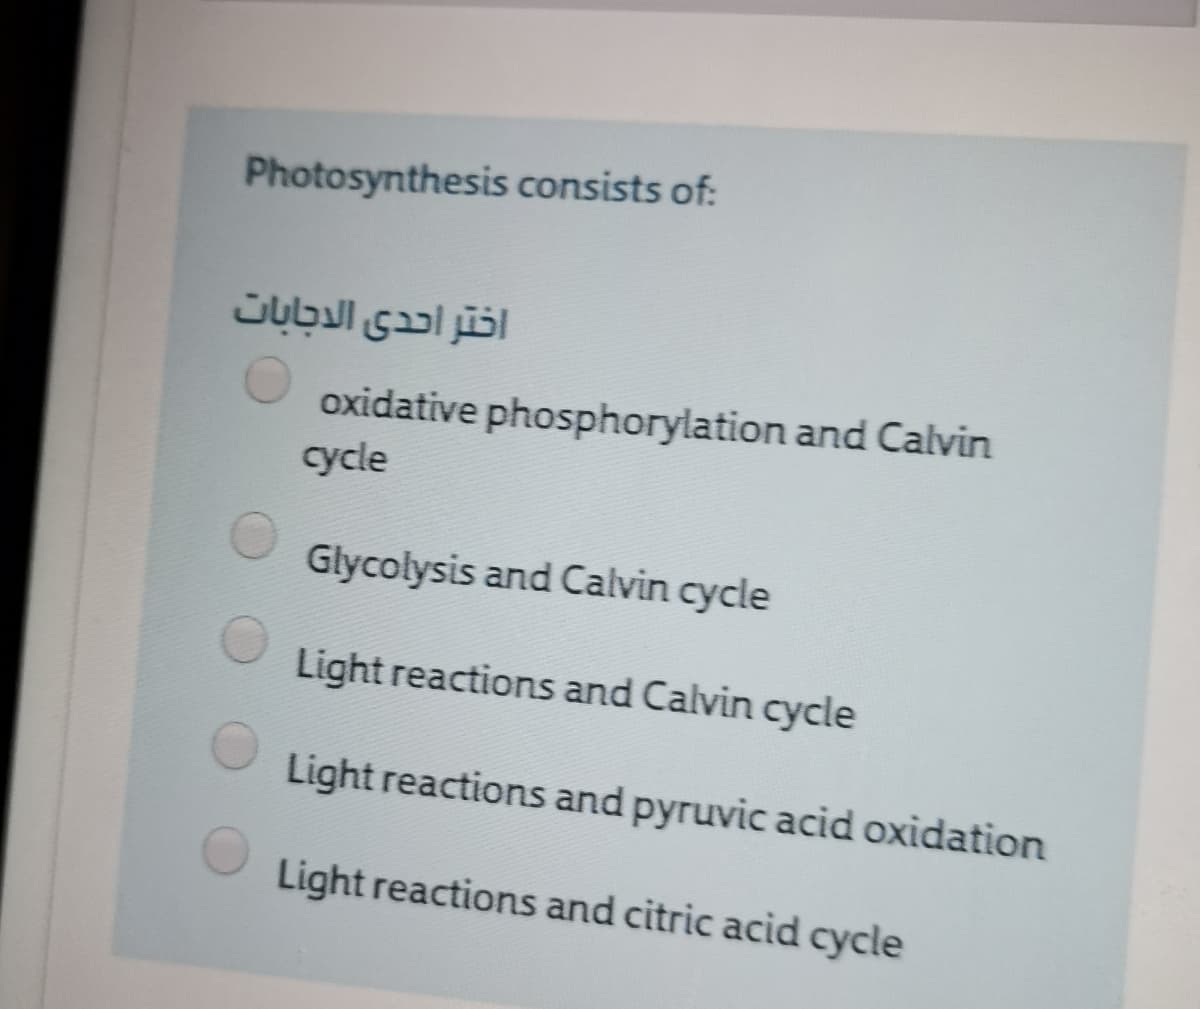 Photosynthesis consists of:
O oxidative phosphorylation and Calvin
cycle
Glycolysis and Calvin cycle
Light reactions and Calvin cycle
Light reactions and pyruvic acid oxidation
Light reactions and citric acid cycle
